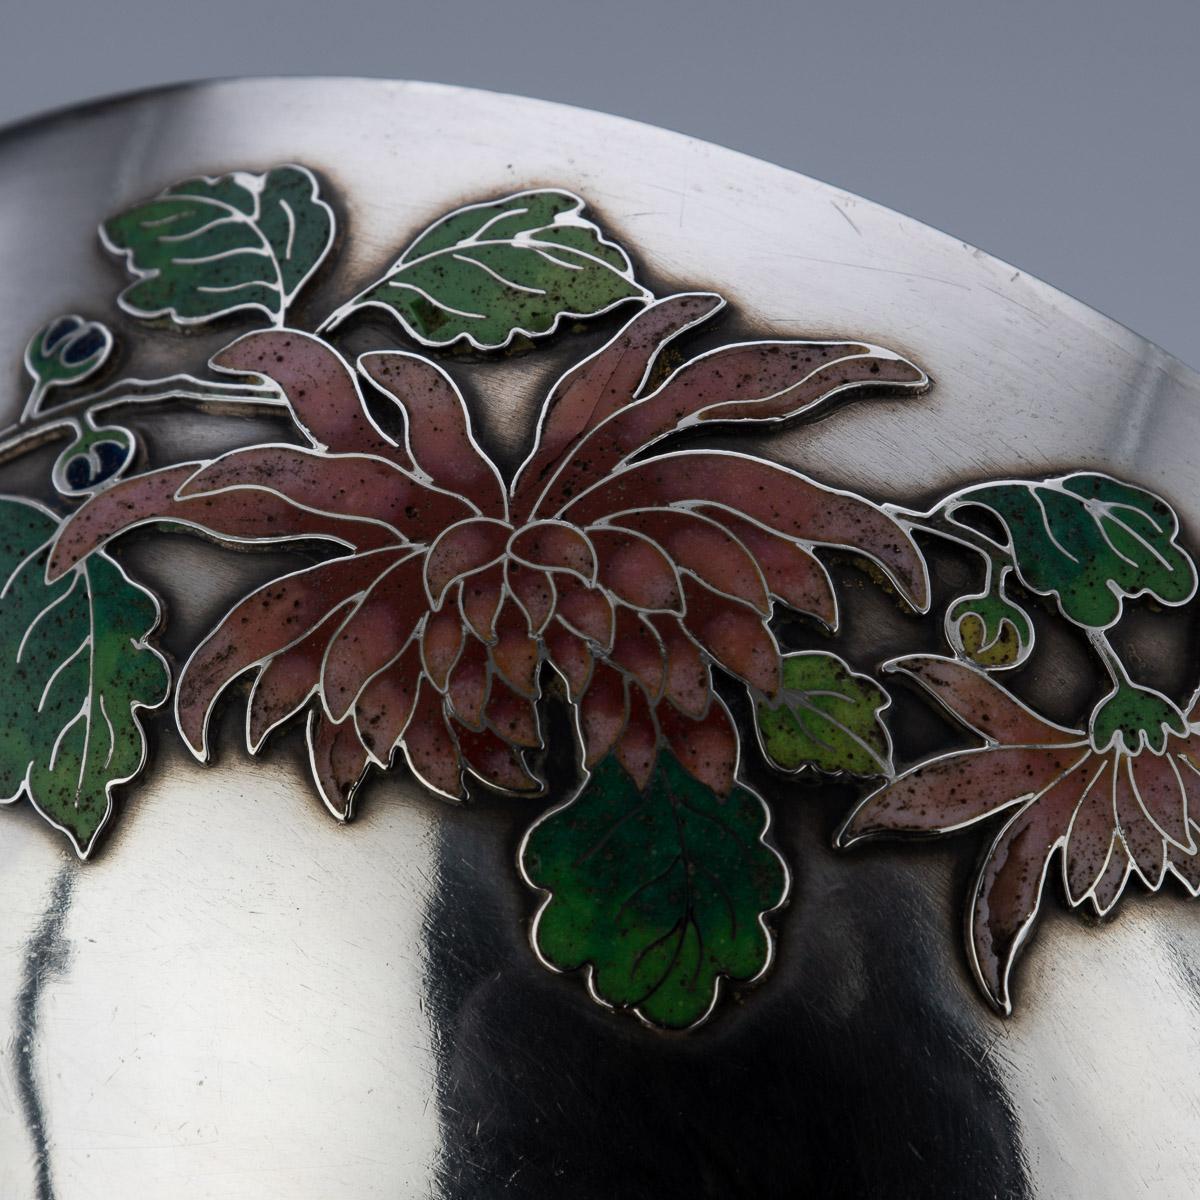 19th Century Rare Chinese Export Solid Silver & Enamel Bowl, Wang Hing, c.1890 For Sale 12